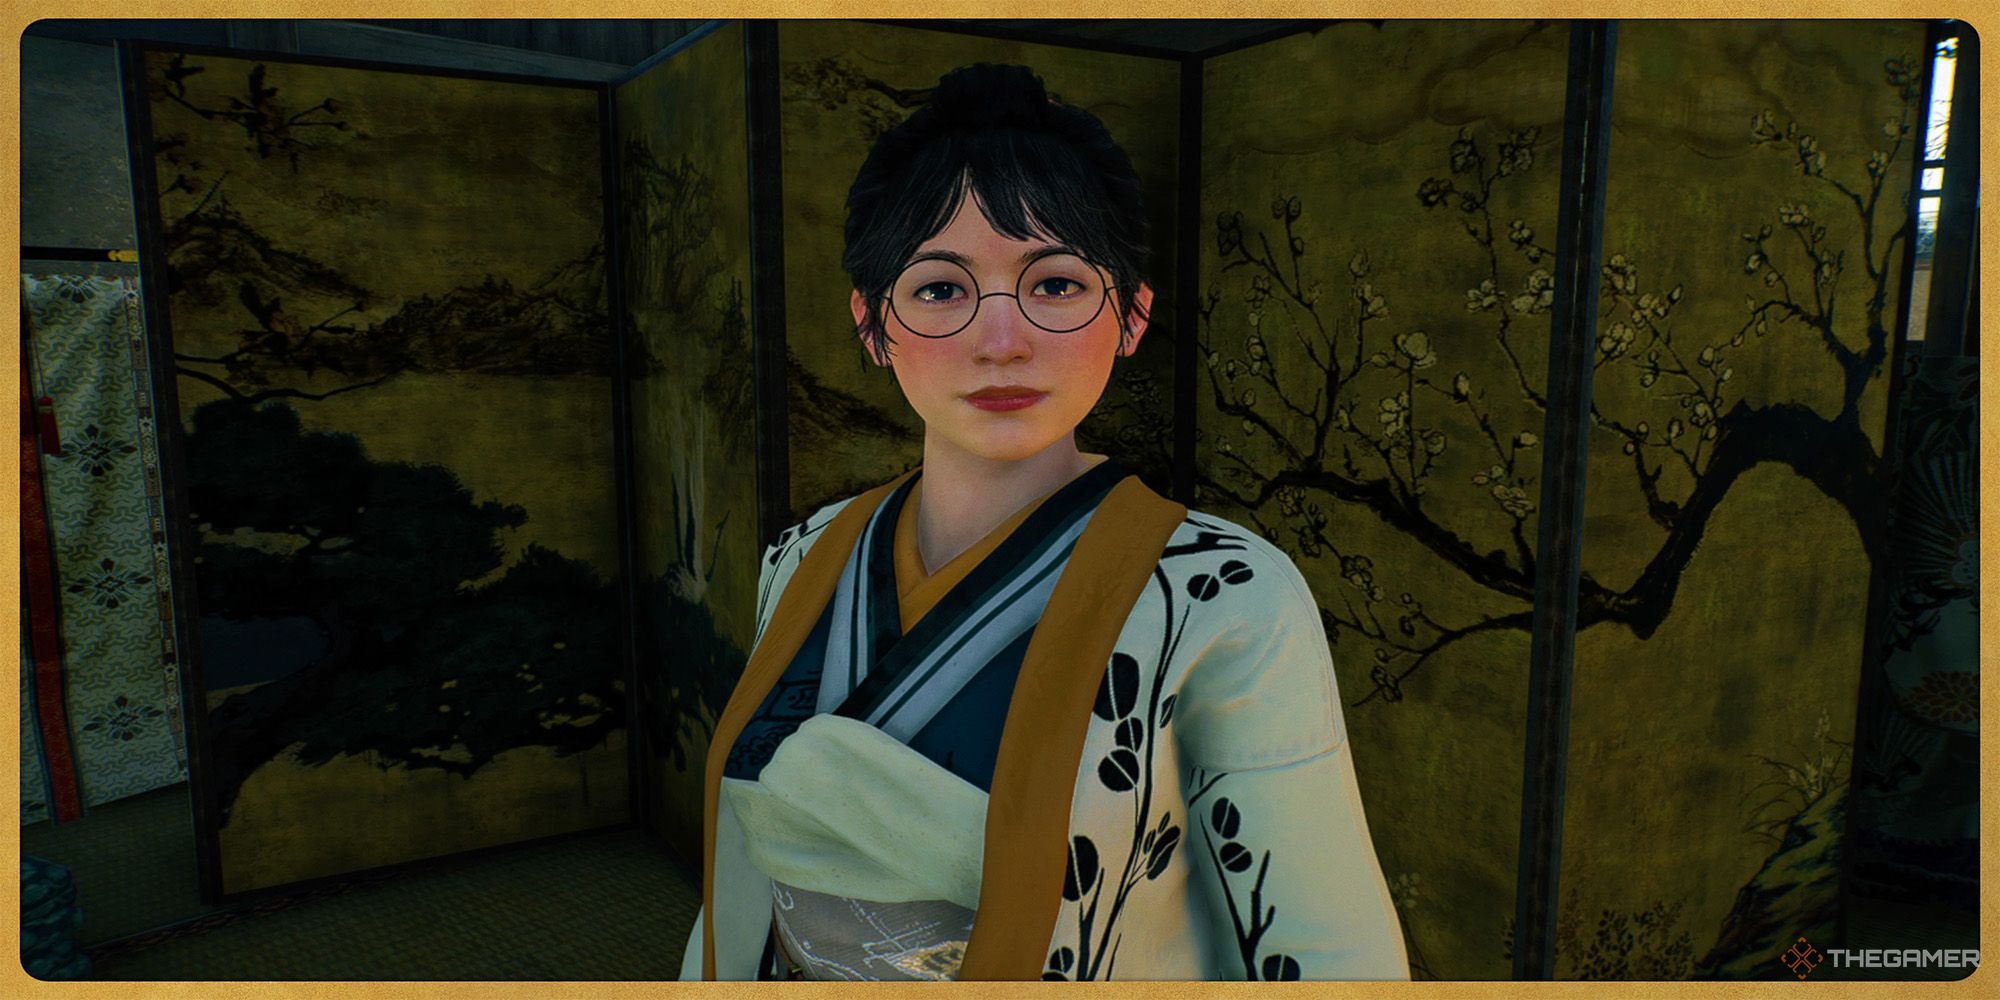 Fumi Sugi stands in front of a green byobu in a photo surrounded by a yellow frame in Rise of the Ronin.